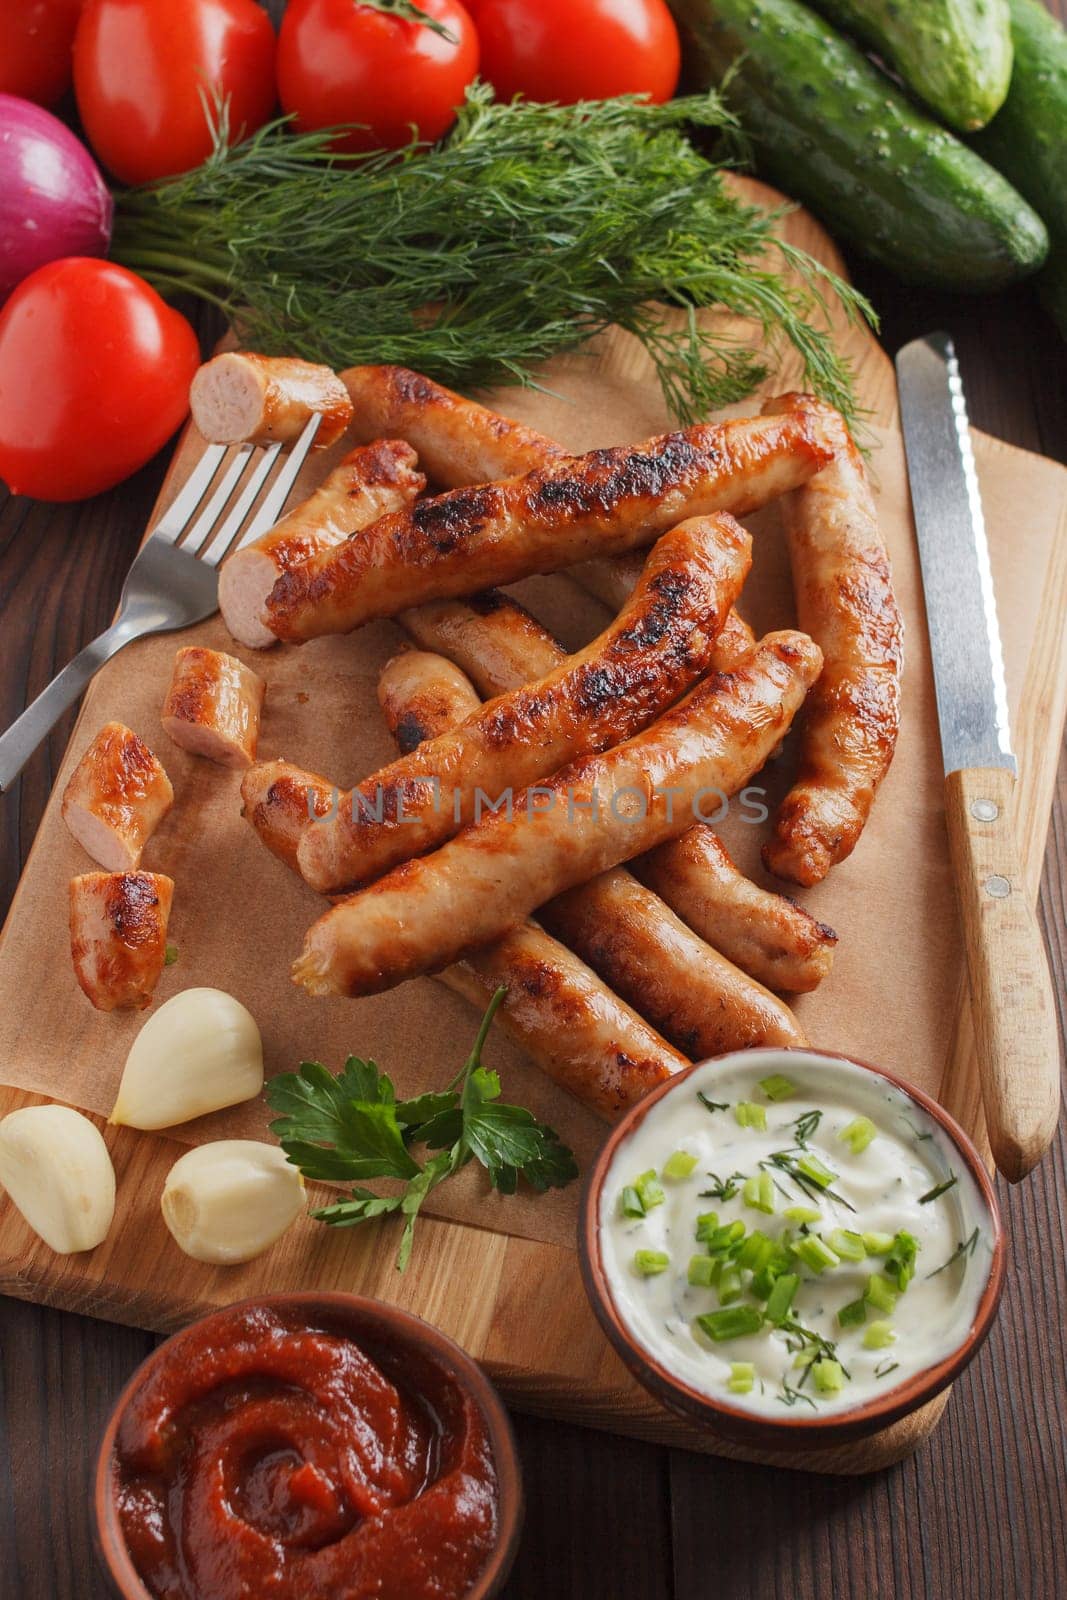 Delicious sausages on a wooden board with various sauces